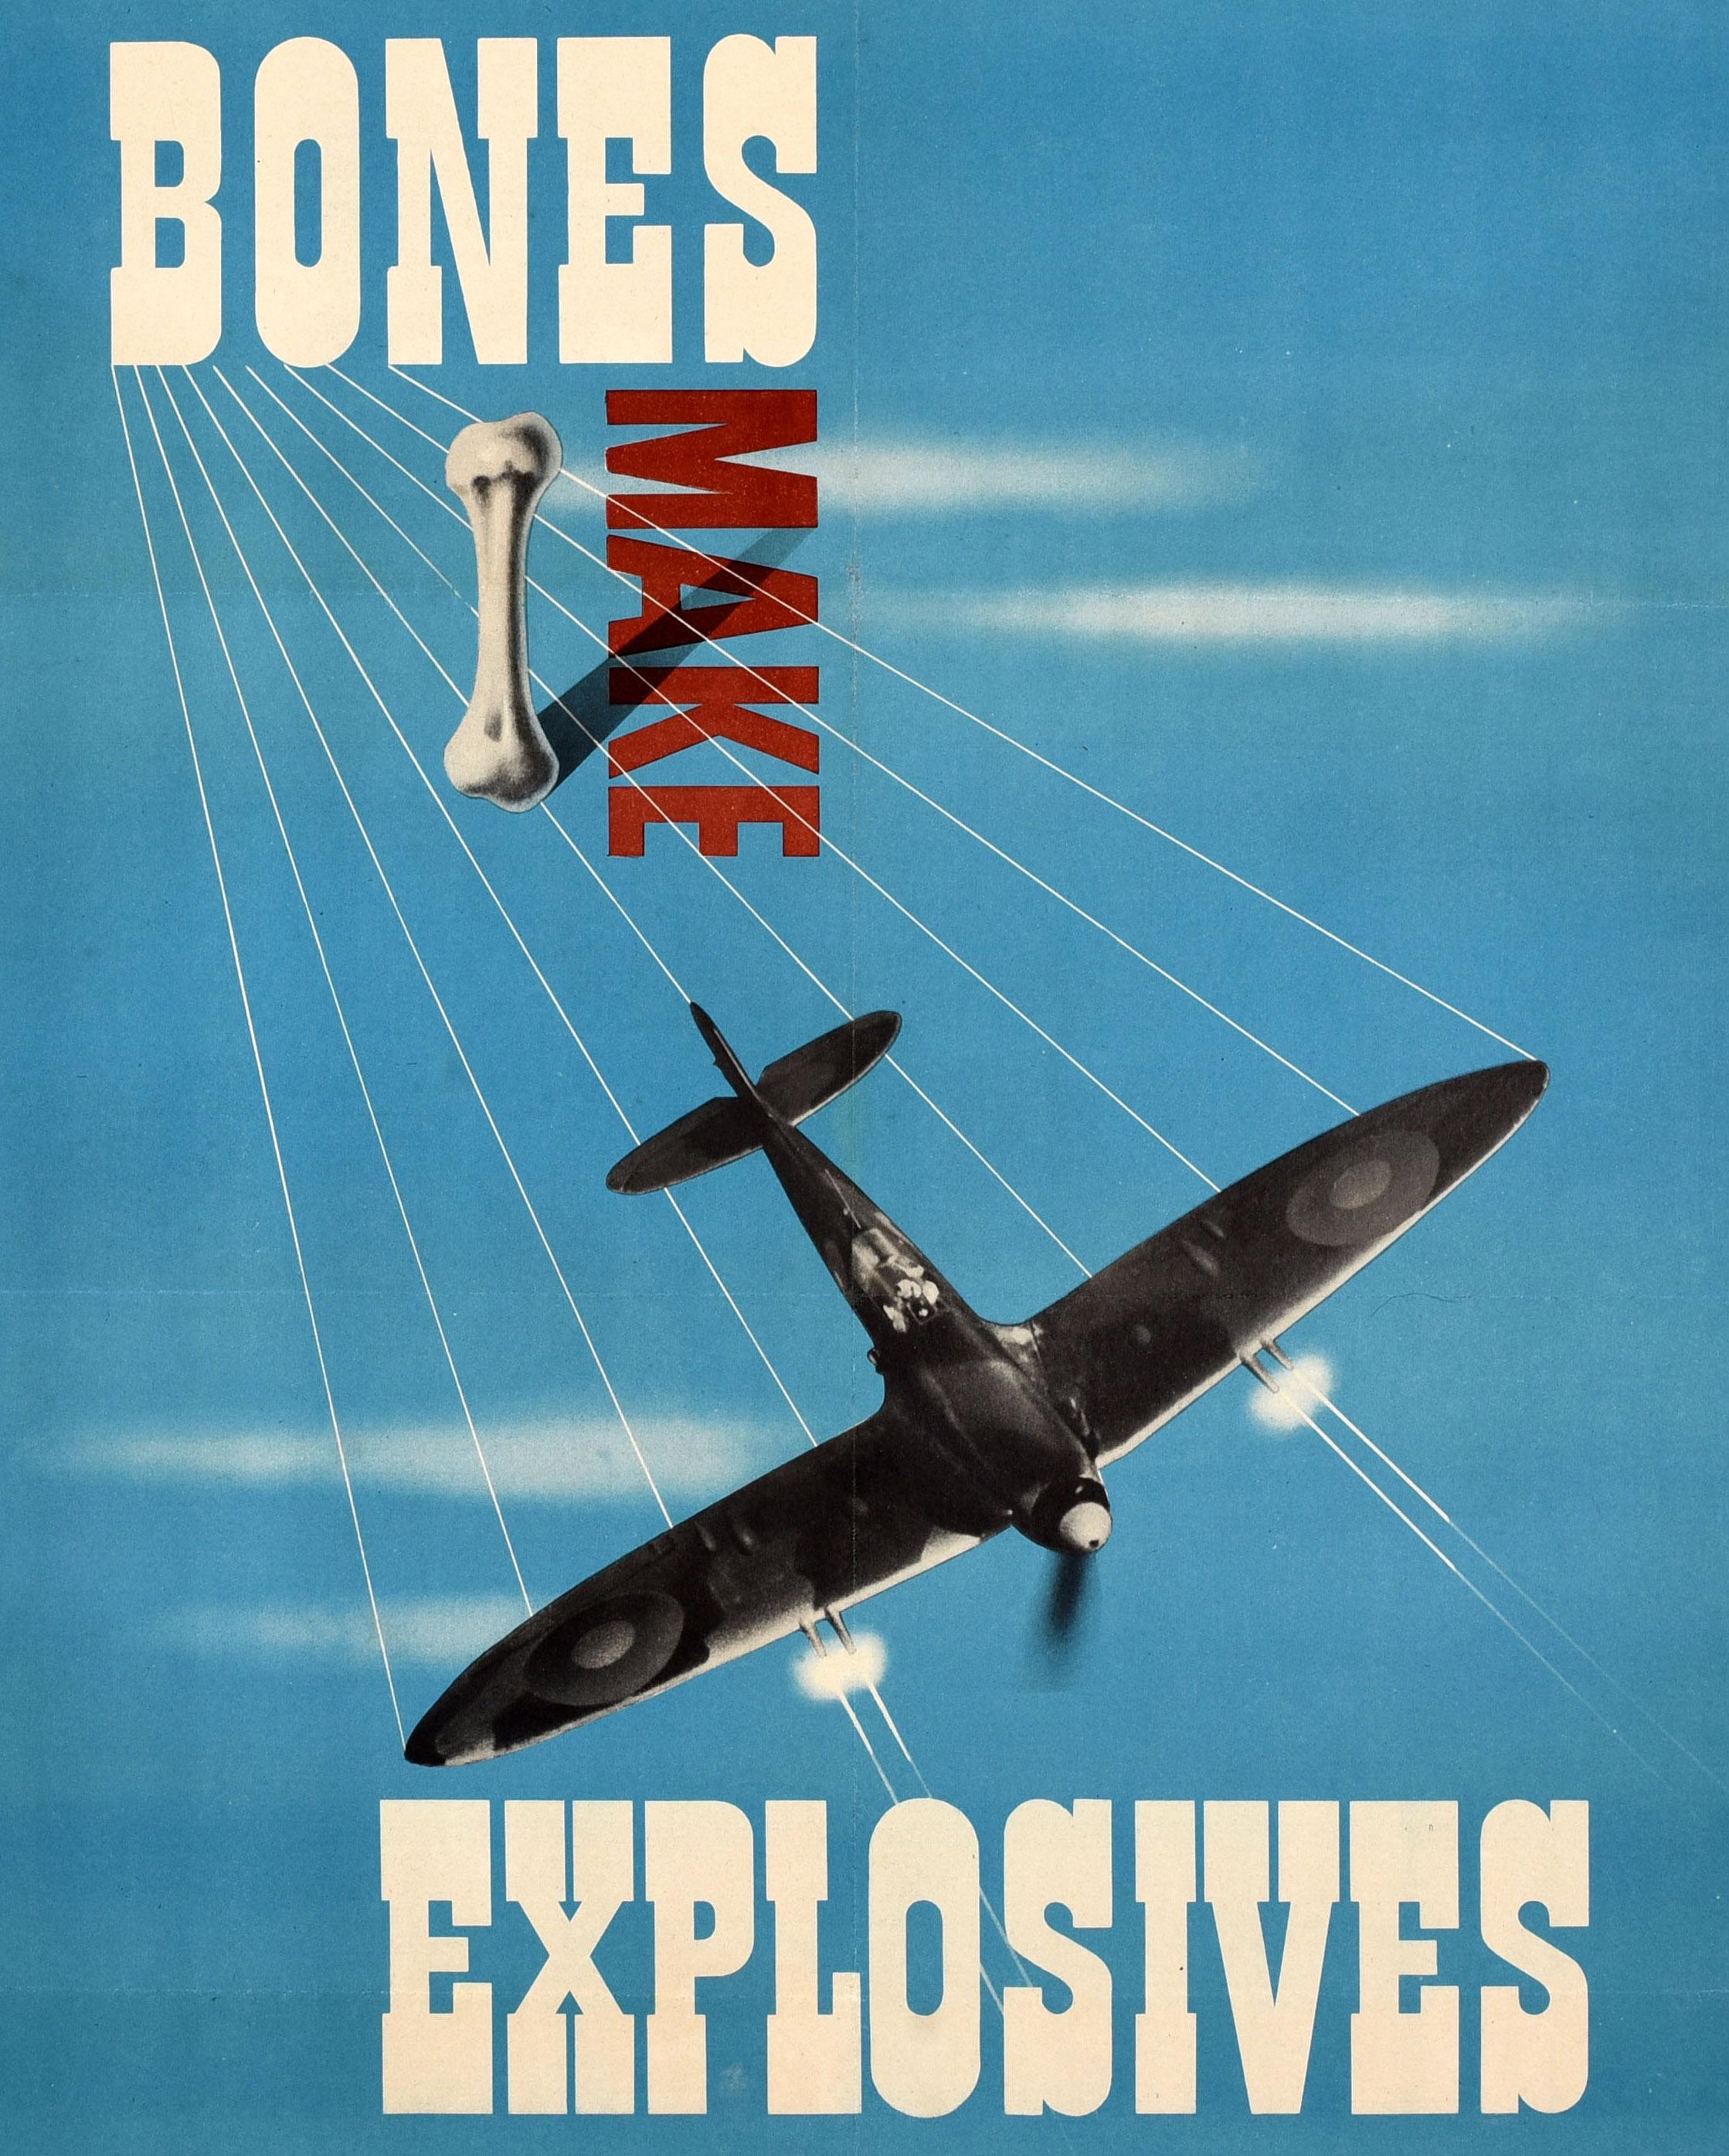 Original vintage World War Two Home Front recycling poster - Bones Make Explosives Put Out All Bones For Salvage - featuring a great modernist graphic design by Reginald Mount (1906-1979) of an RAF Royal Air Force spitfire plane firing its machine